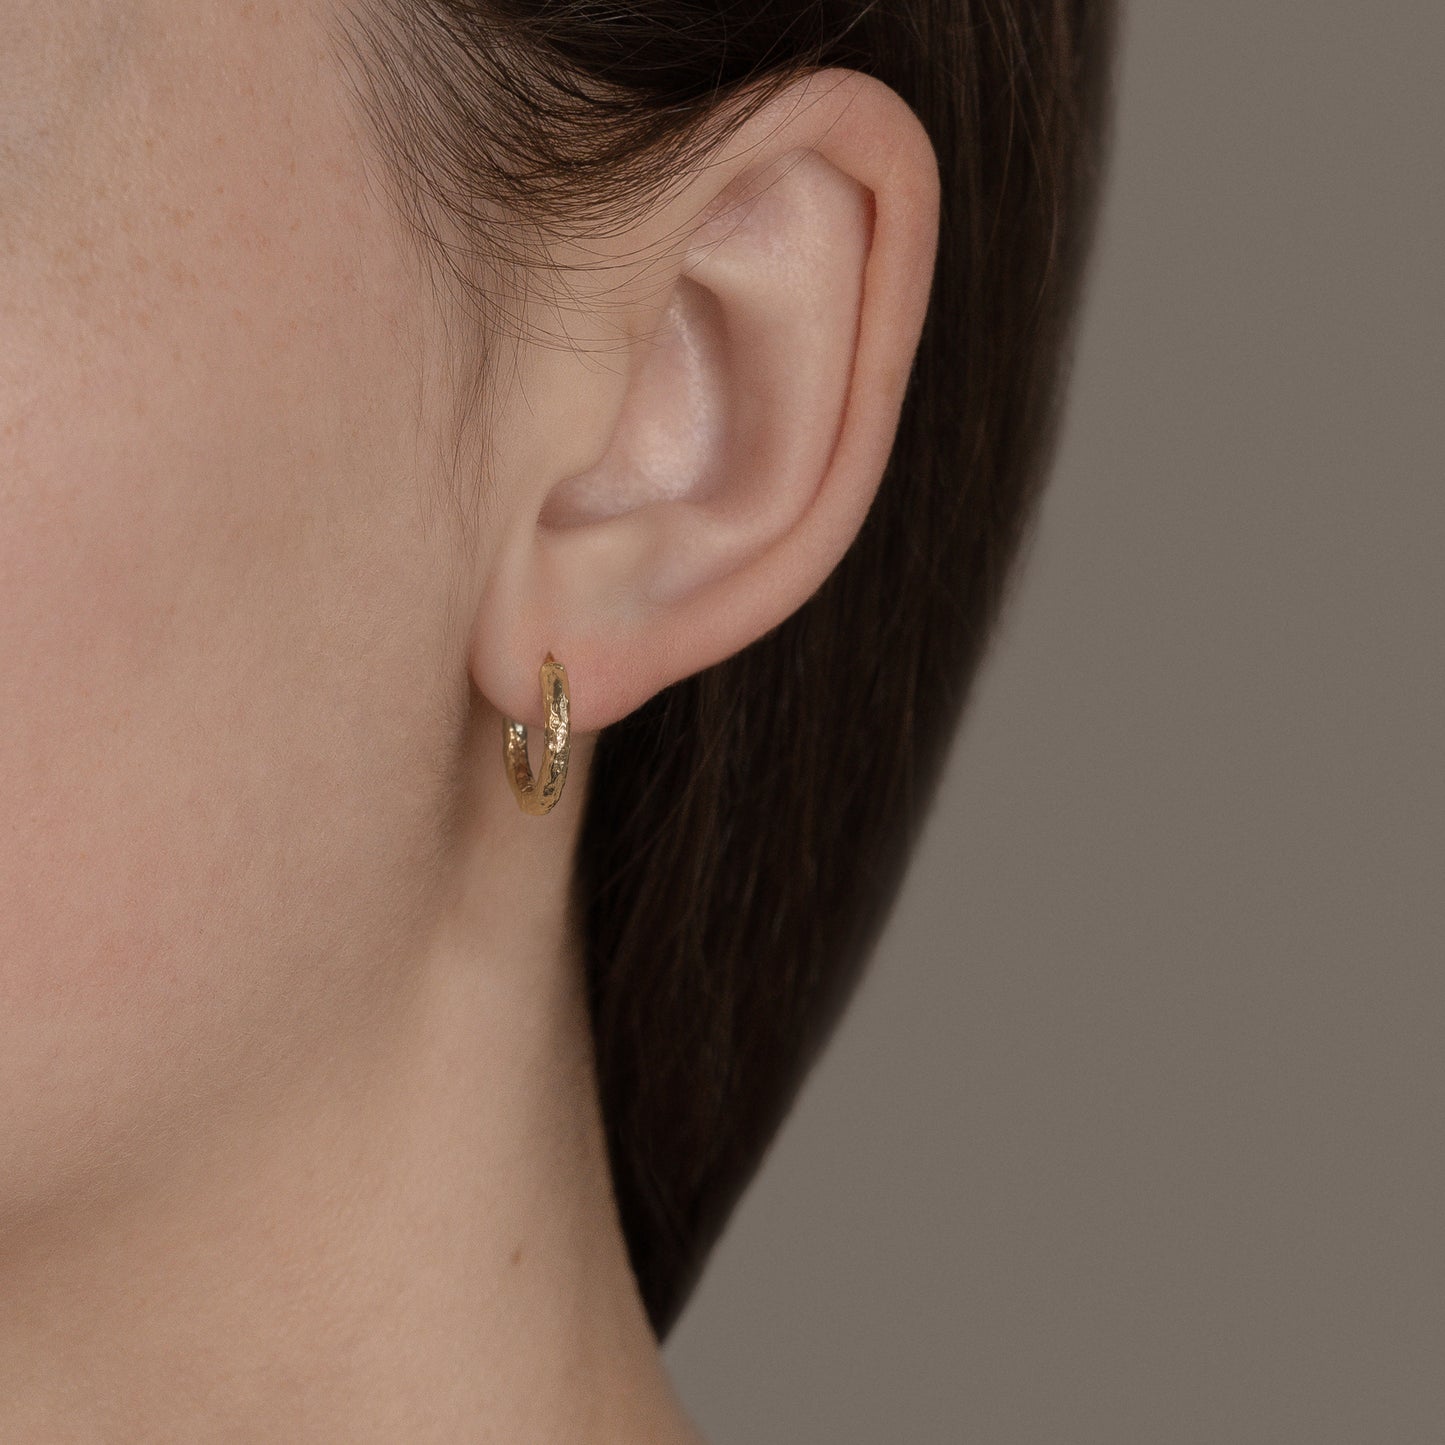 Carla creoles organic structure simple classic hoops kreoler handcraftedcph danish design silver sølv forgyldt gold plated